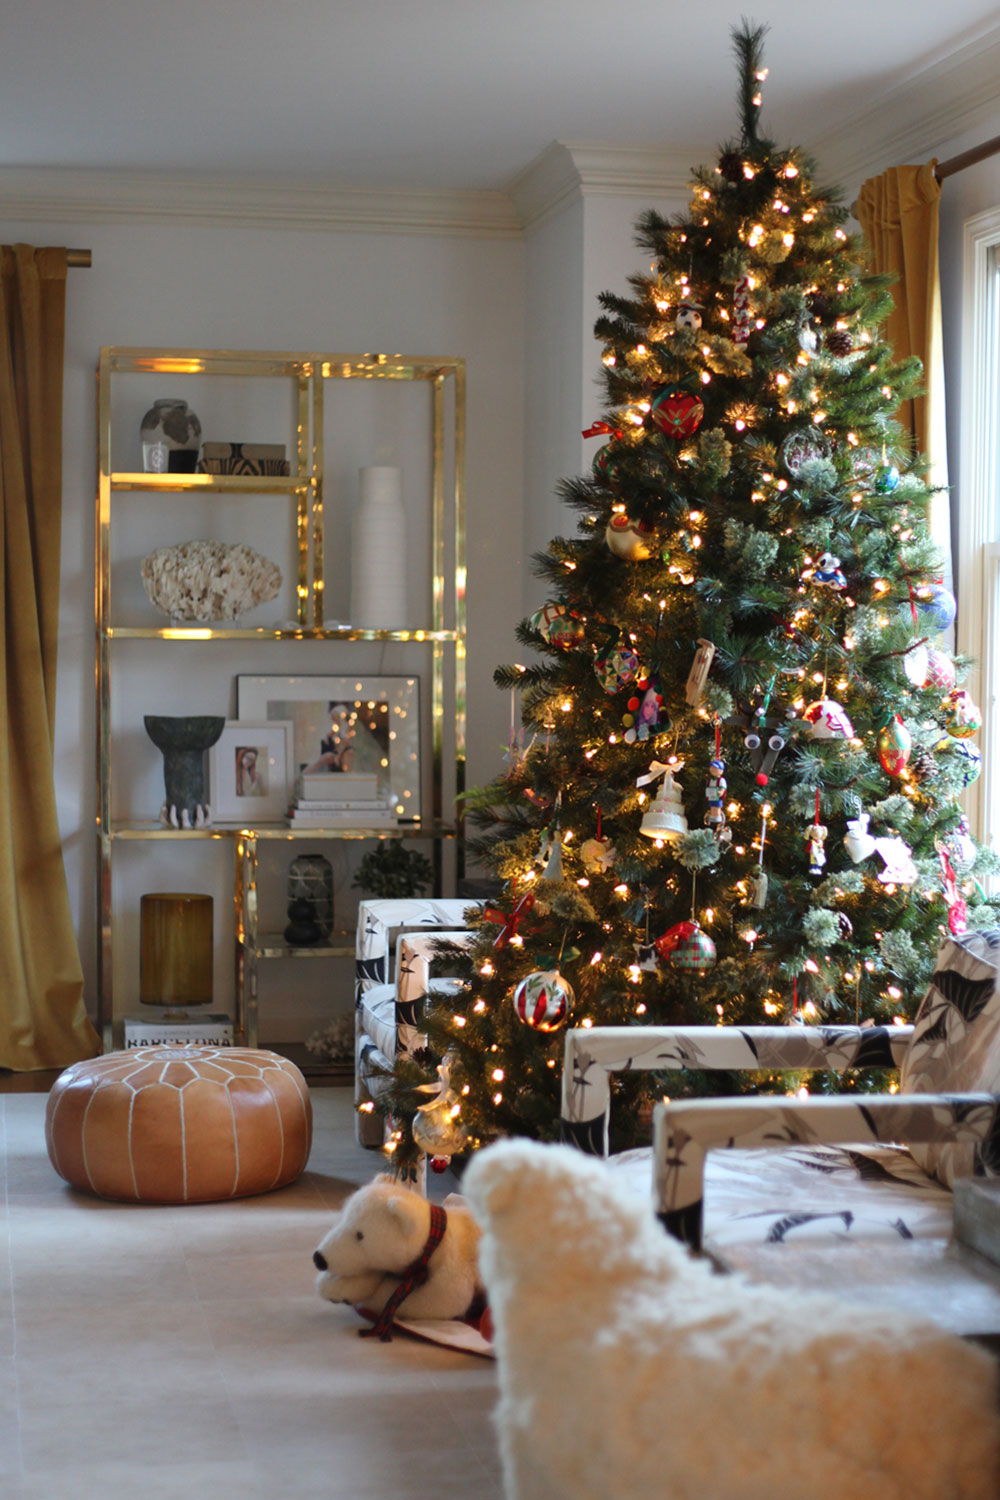 Holiday Decorating Ideas For Your Home | House Of Hipsters | Home Decor